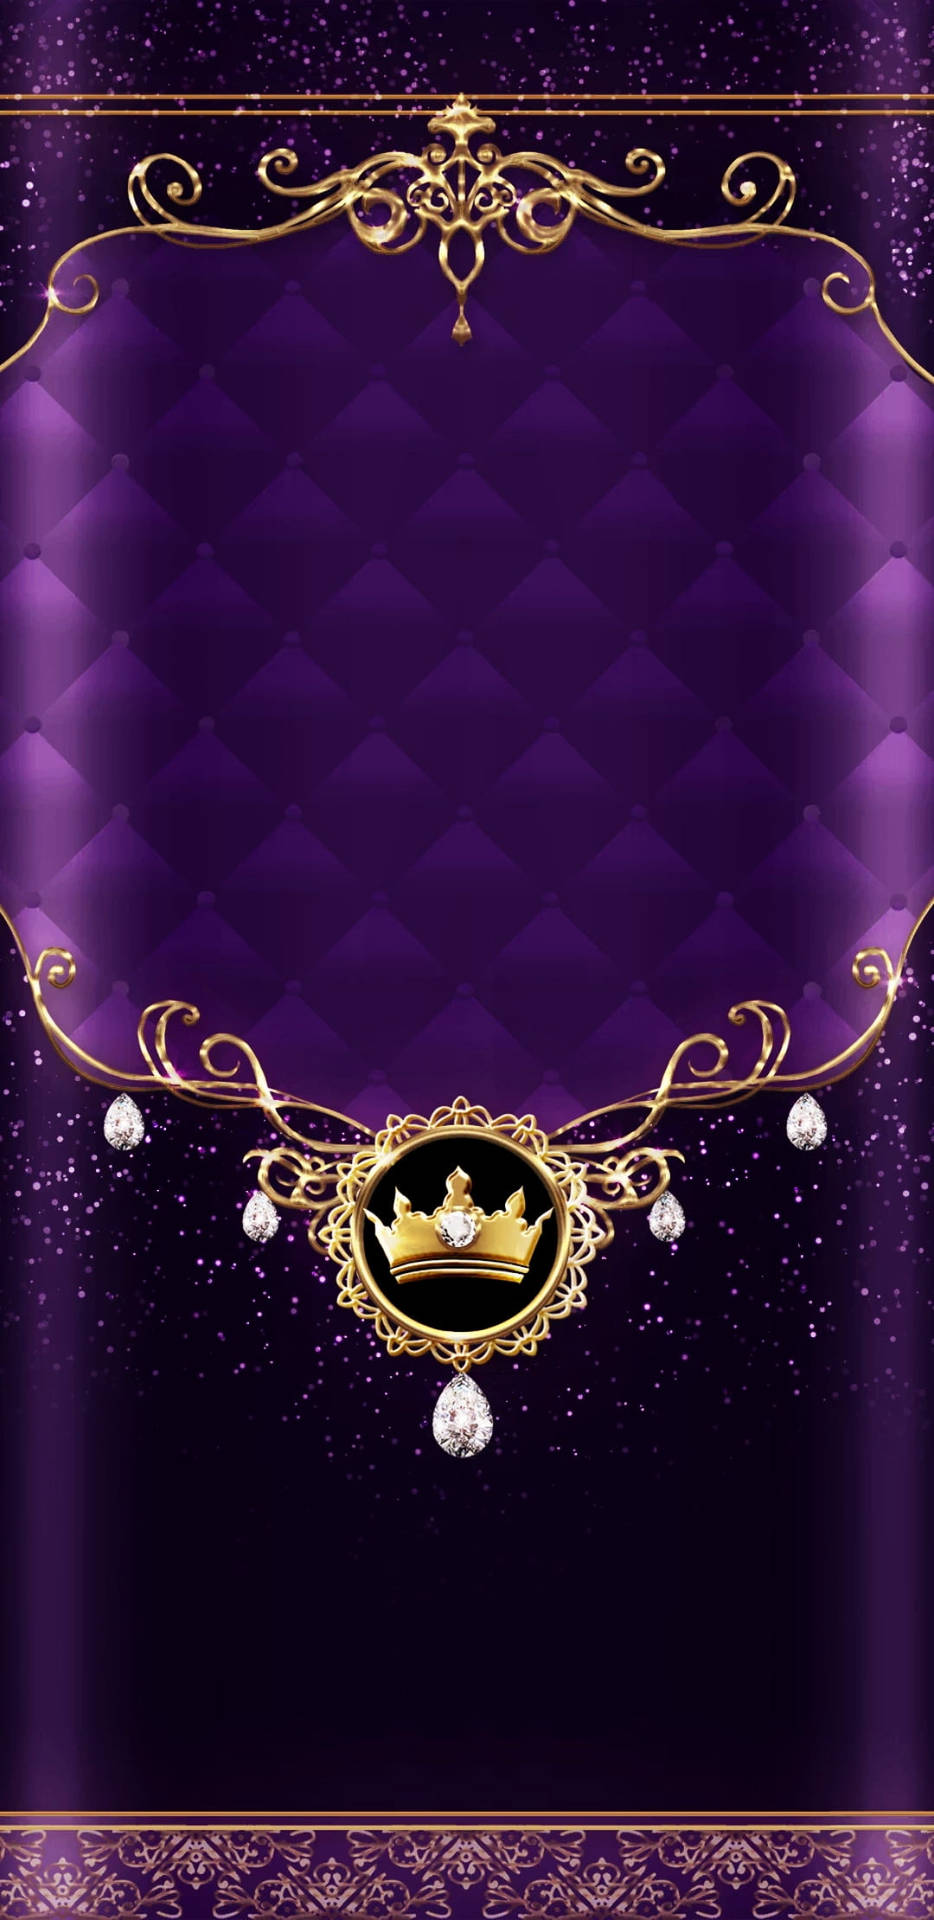 Royal Purple Queen Girly Background